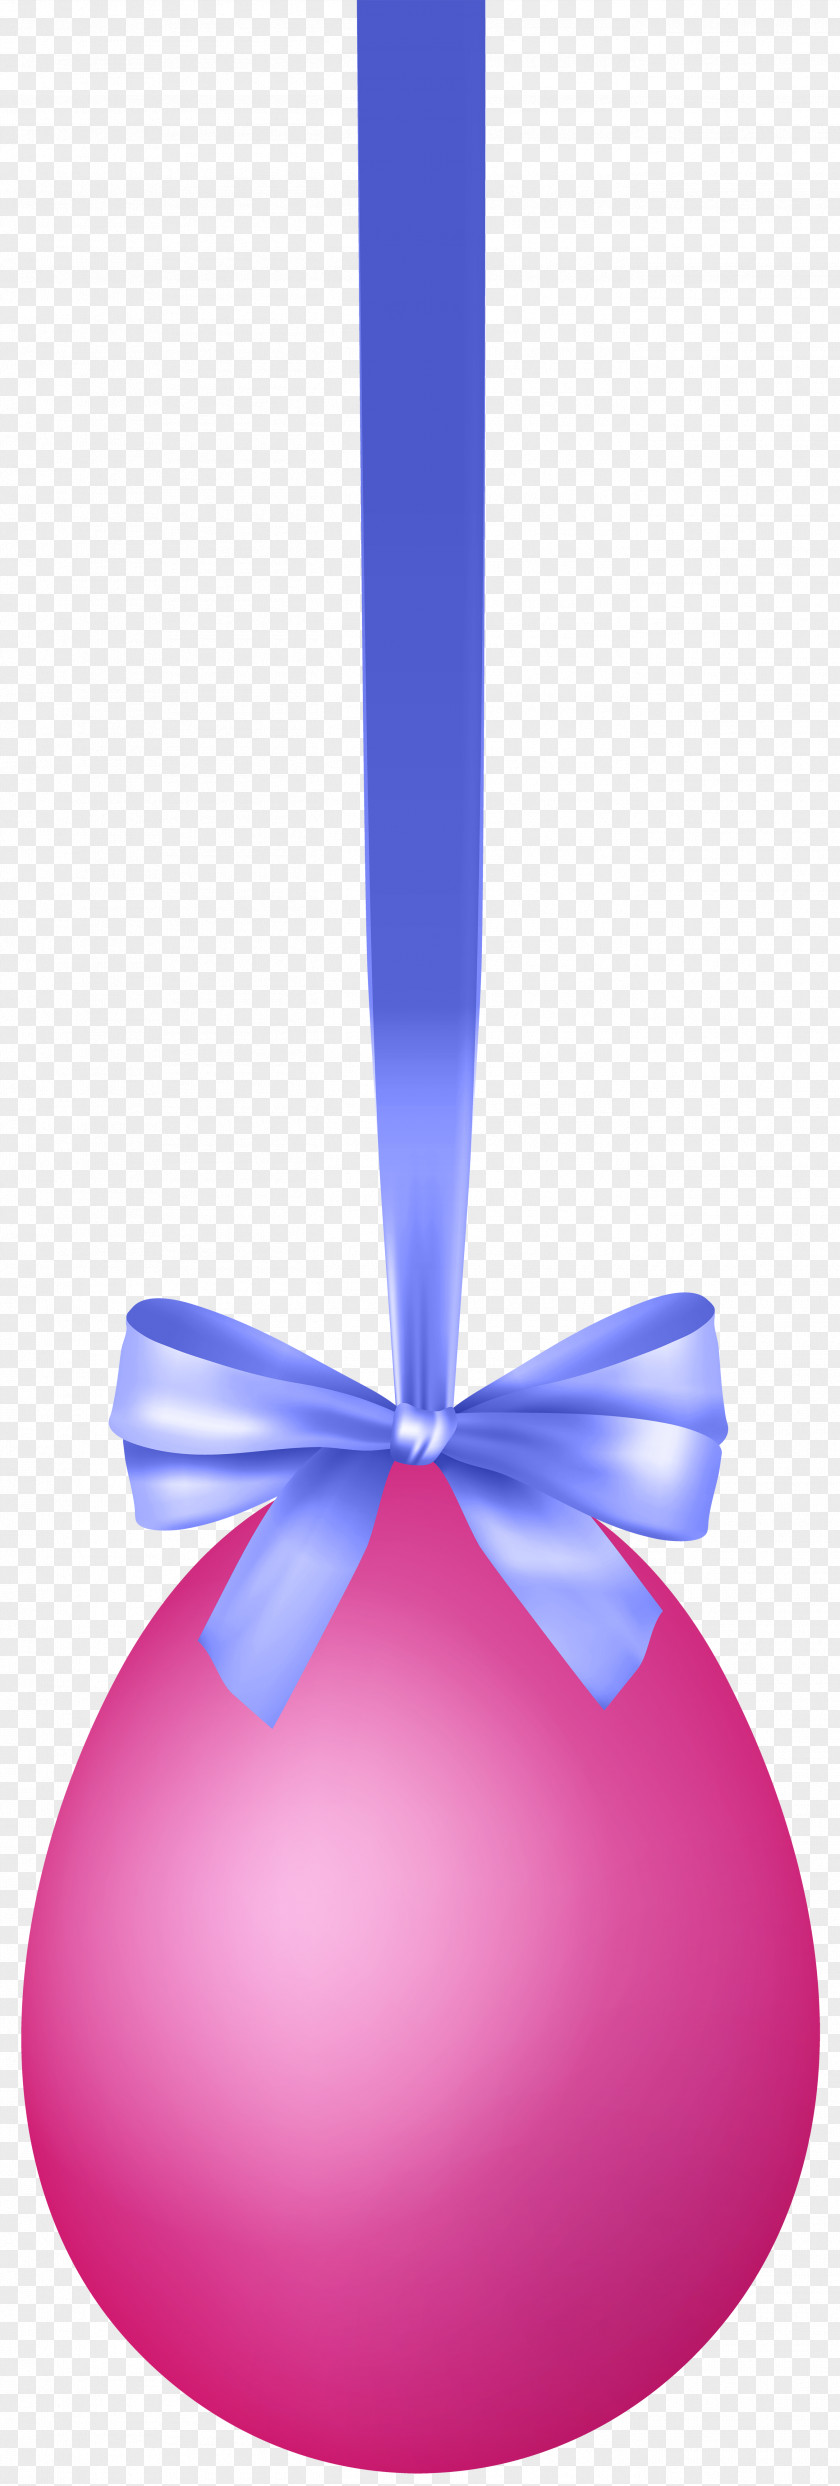 Pink Hanging Easter Egg With Bow Transparent Clip Art Image Red PNG